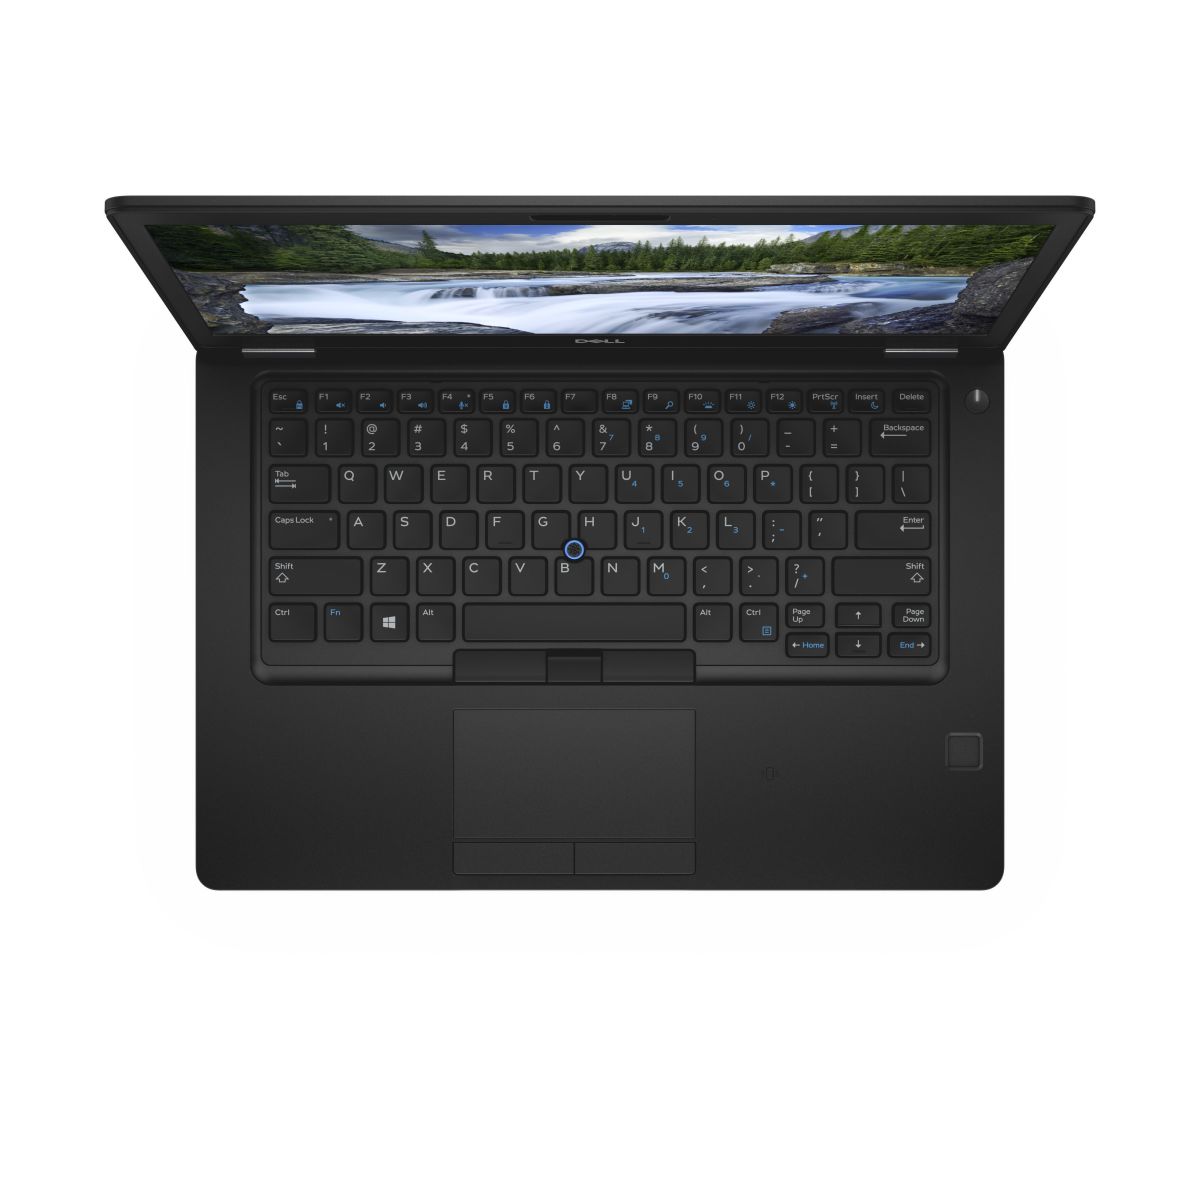 DELL Latitude 5491 - 5491-3553 laptop specifications